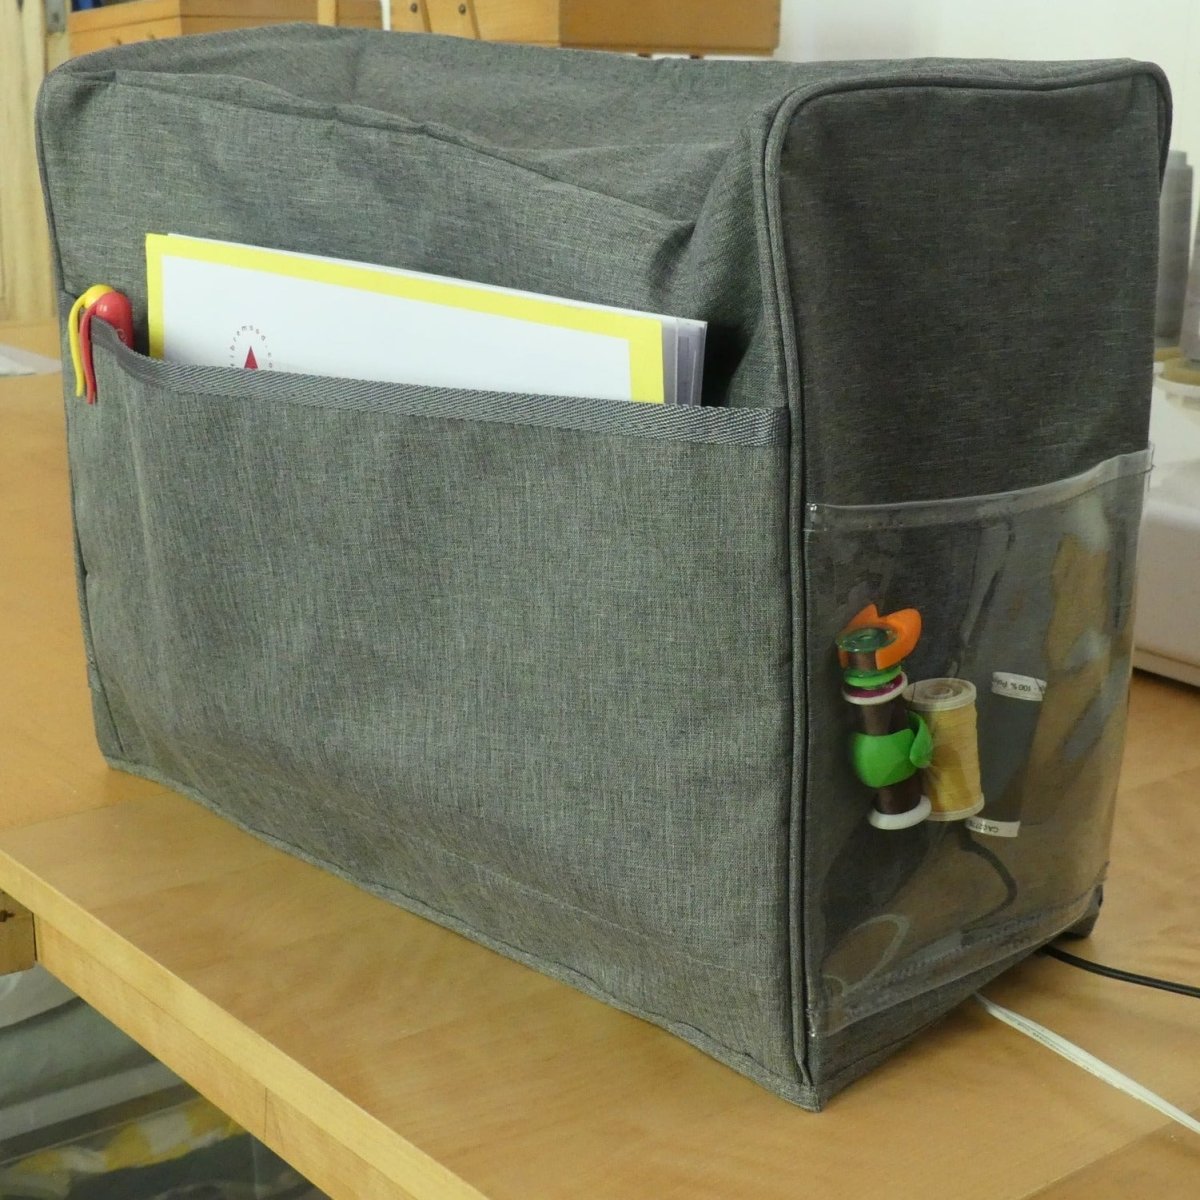 A sewing machine cover that protects a sewing machine from dust with side pockets